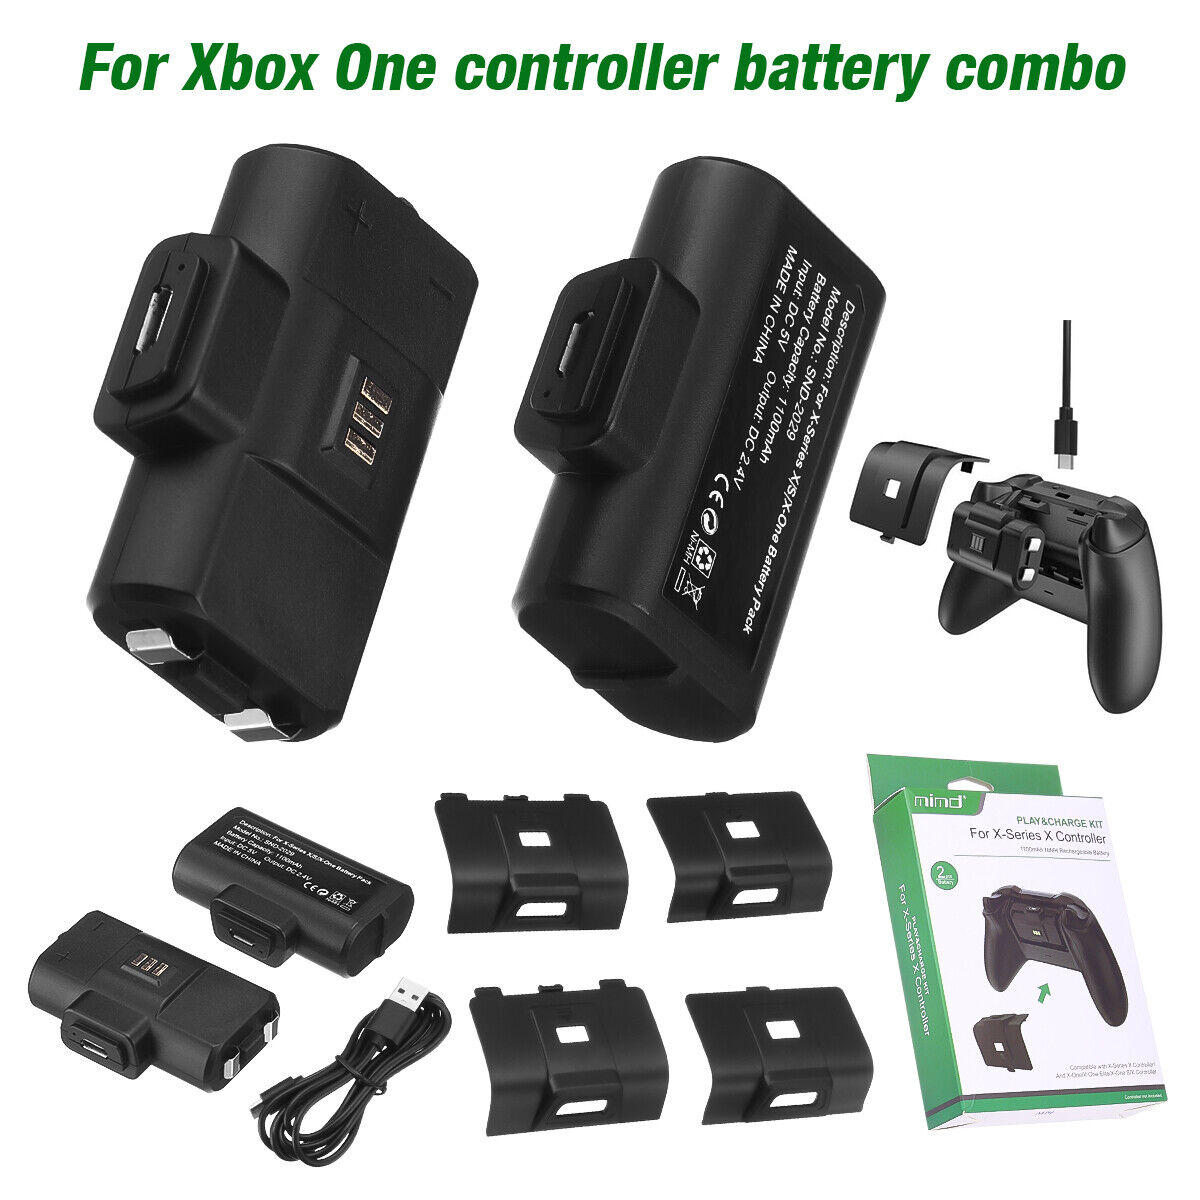 Rechargeable Battery Pack For XBox One X/S Series X/S Controller & Charger Cable EBL Does not apply - фотография #2